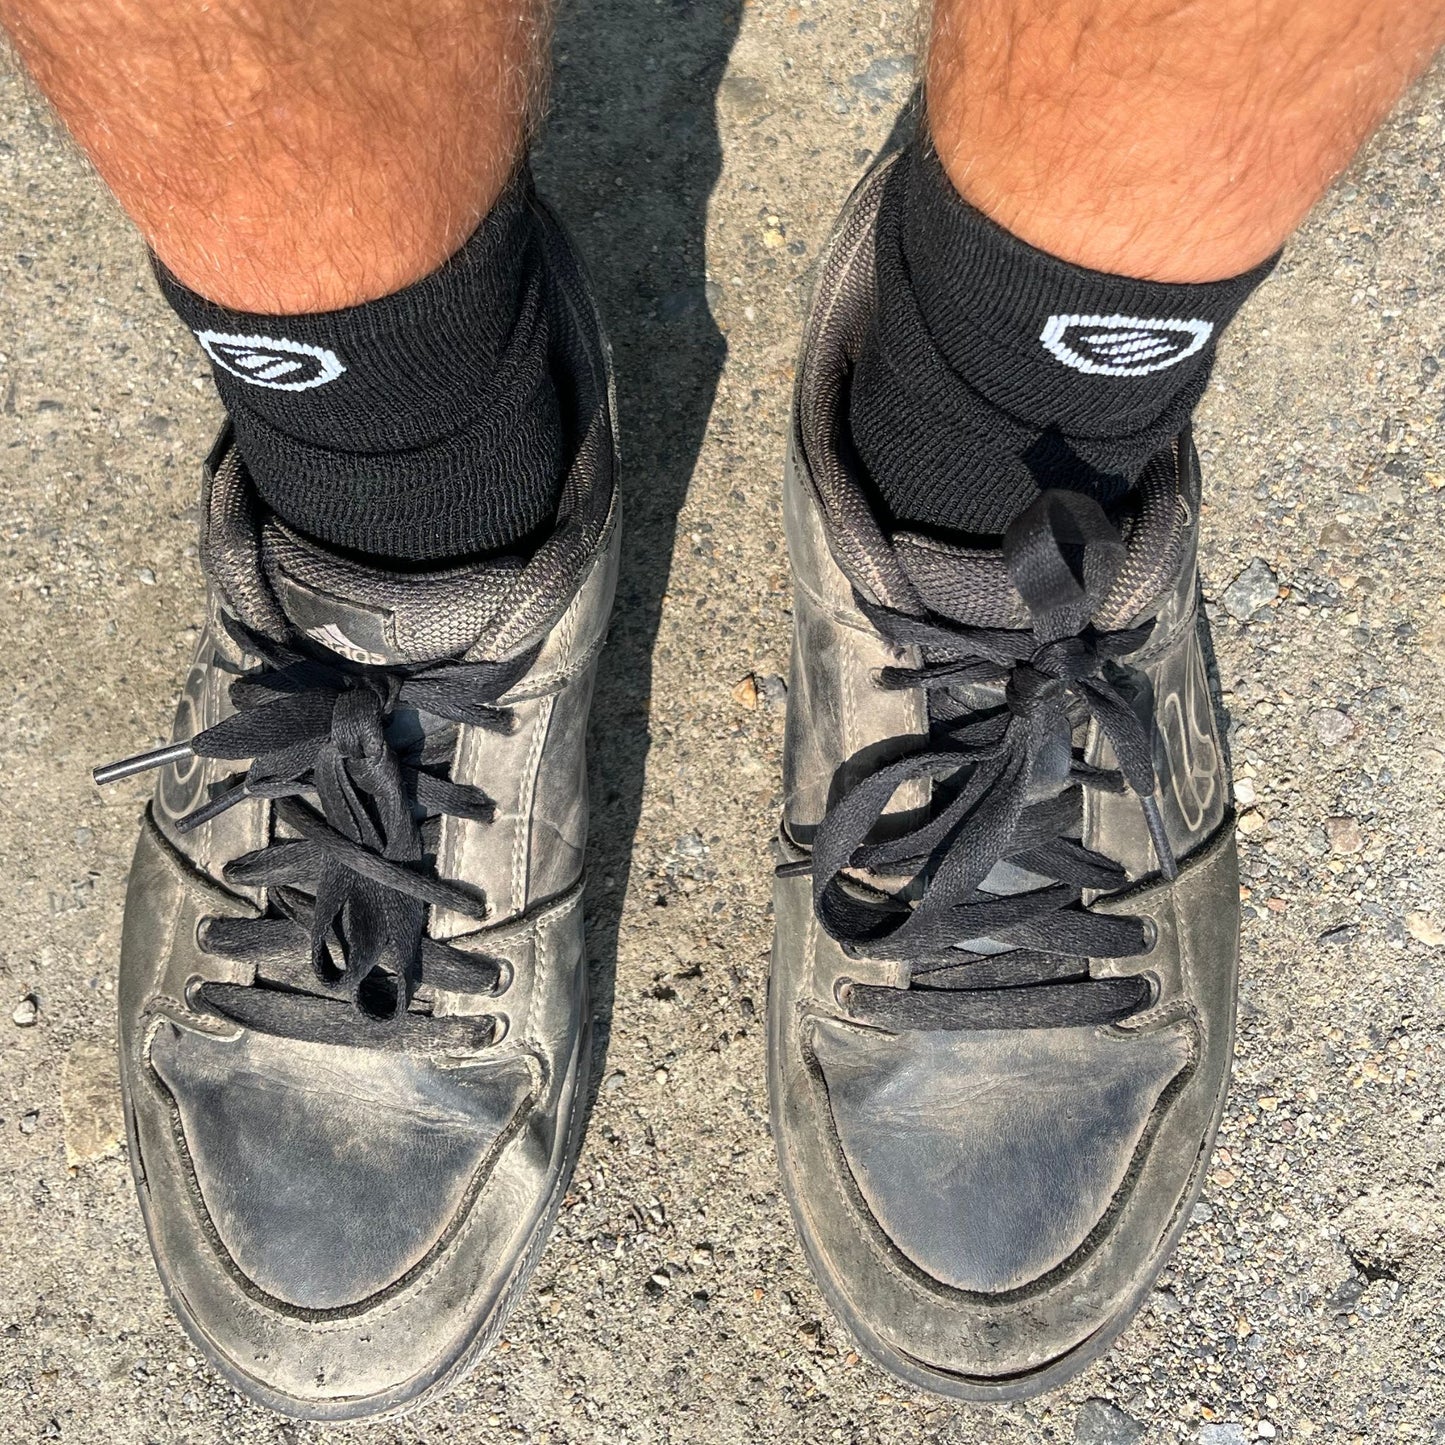 mid length black socks in dusty shoes at the bike park